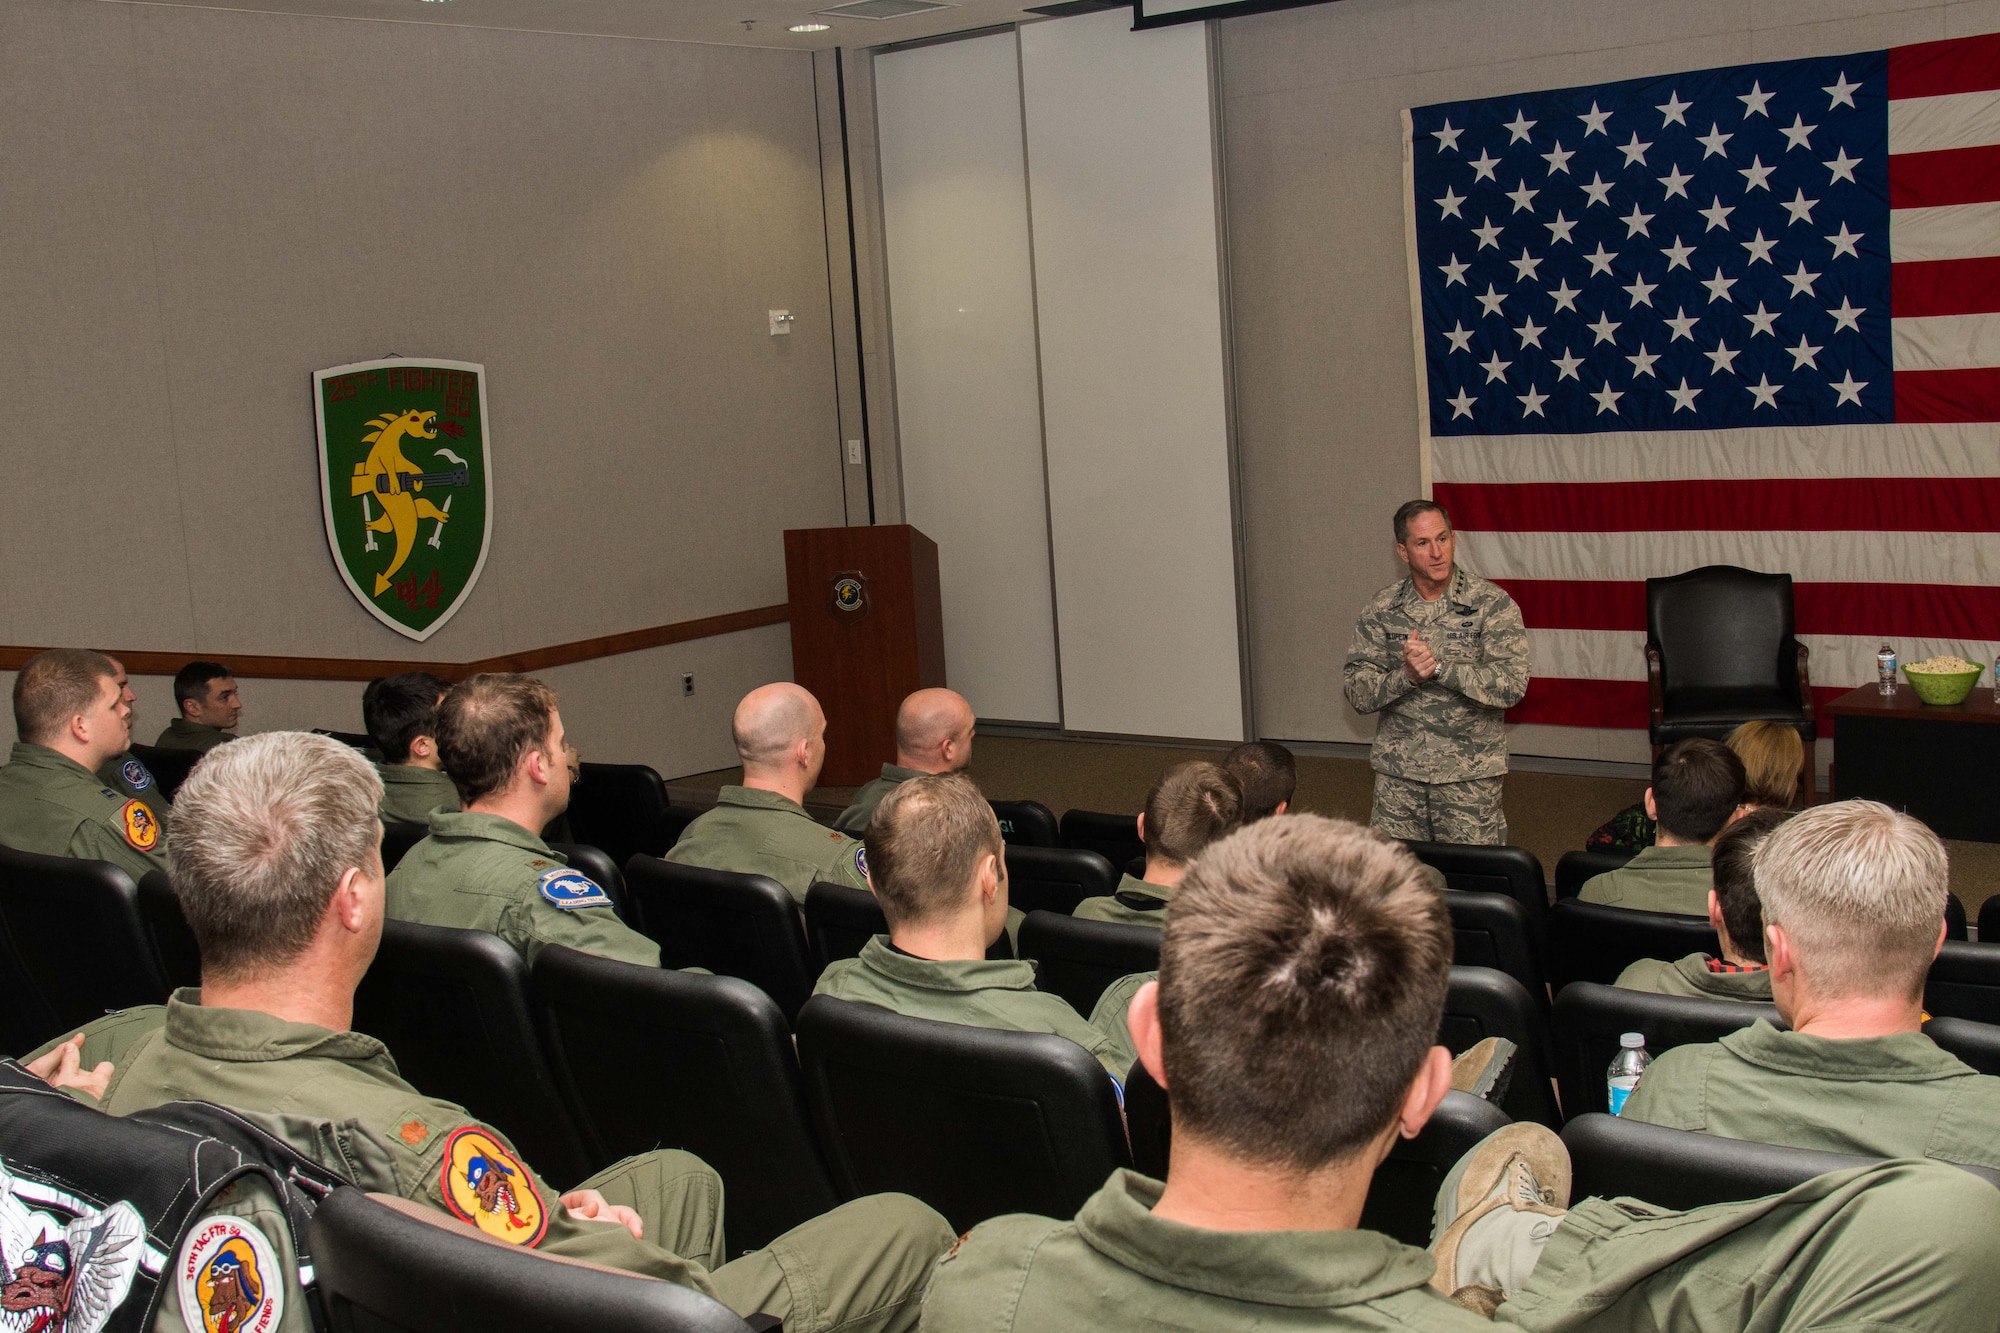 Air Force Chief of Staff Gen. David L. Goldfein speaks to 25th Fighter Squadron pilots during a briefing at Osan Air Base, Republic of Korea, Oct. 31, 2016. Goldfein spoke with the pilots about upcoming changes and plans for fighter pilot retention. Goldfein visited Osan to communicate his focus areas of revitalizing squadrons, strengthening joint leaders and teams, and multi-domain command and control. (U.S. Air Force photo by Senior Airman Dillian Bamman)